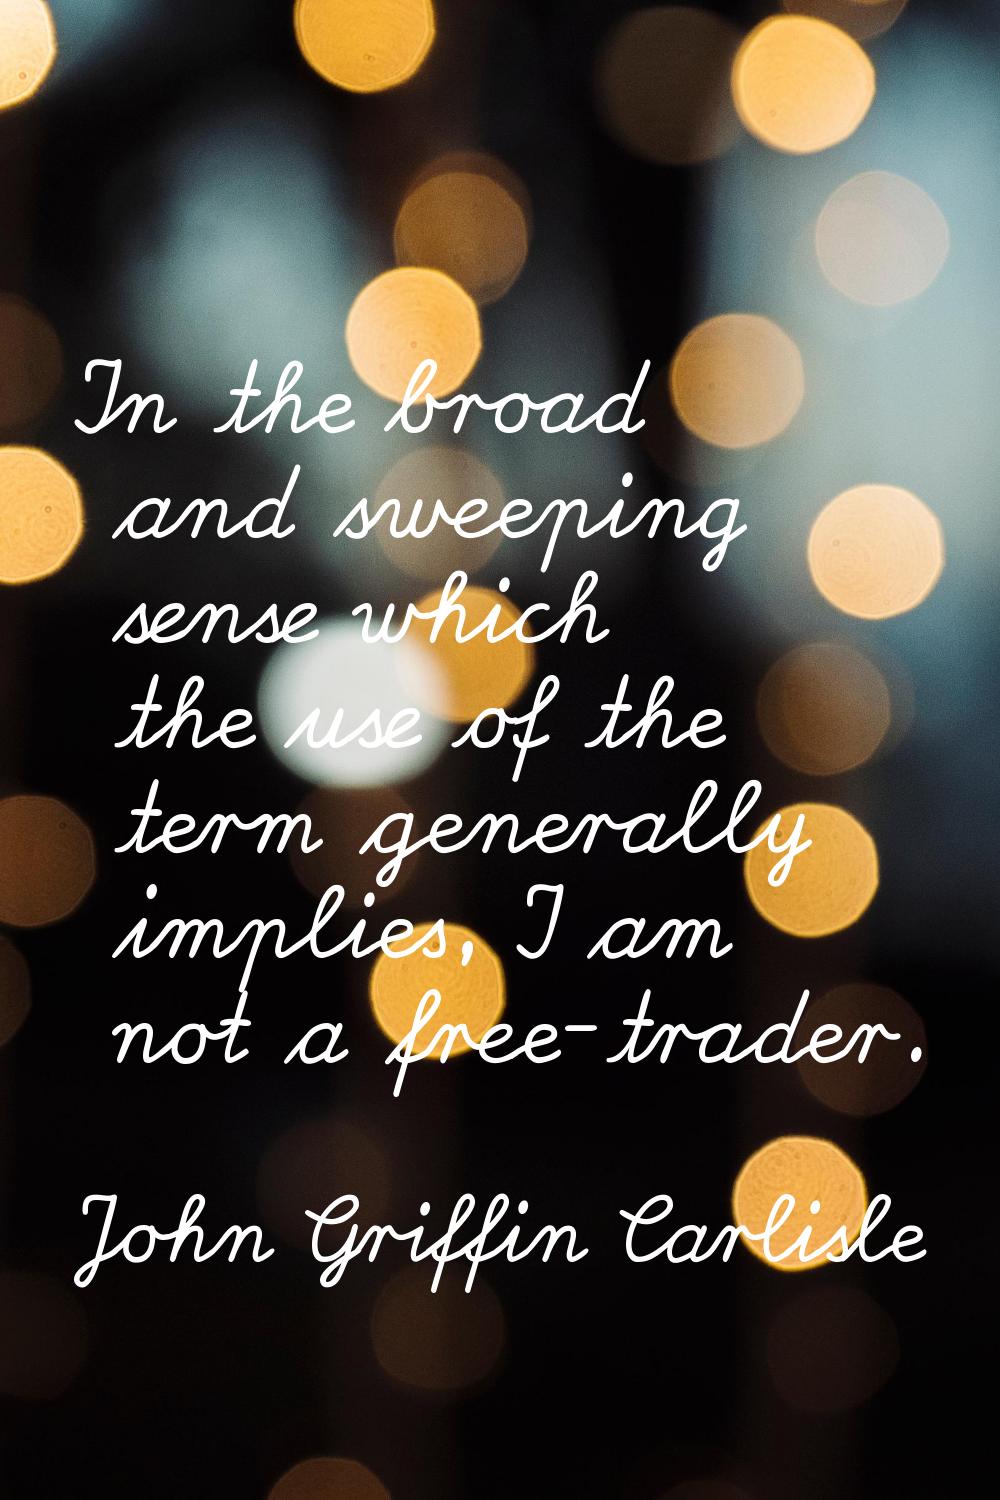 In the broad and sweeping sense which the use of the term generally implies, I am not a free-trader